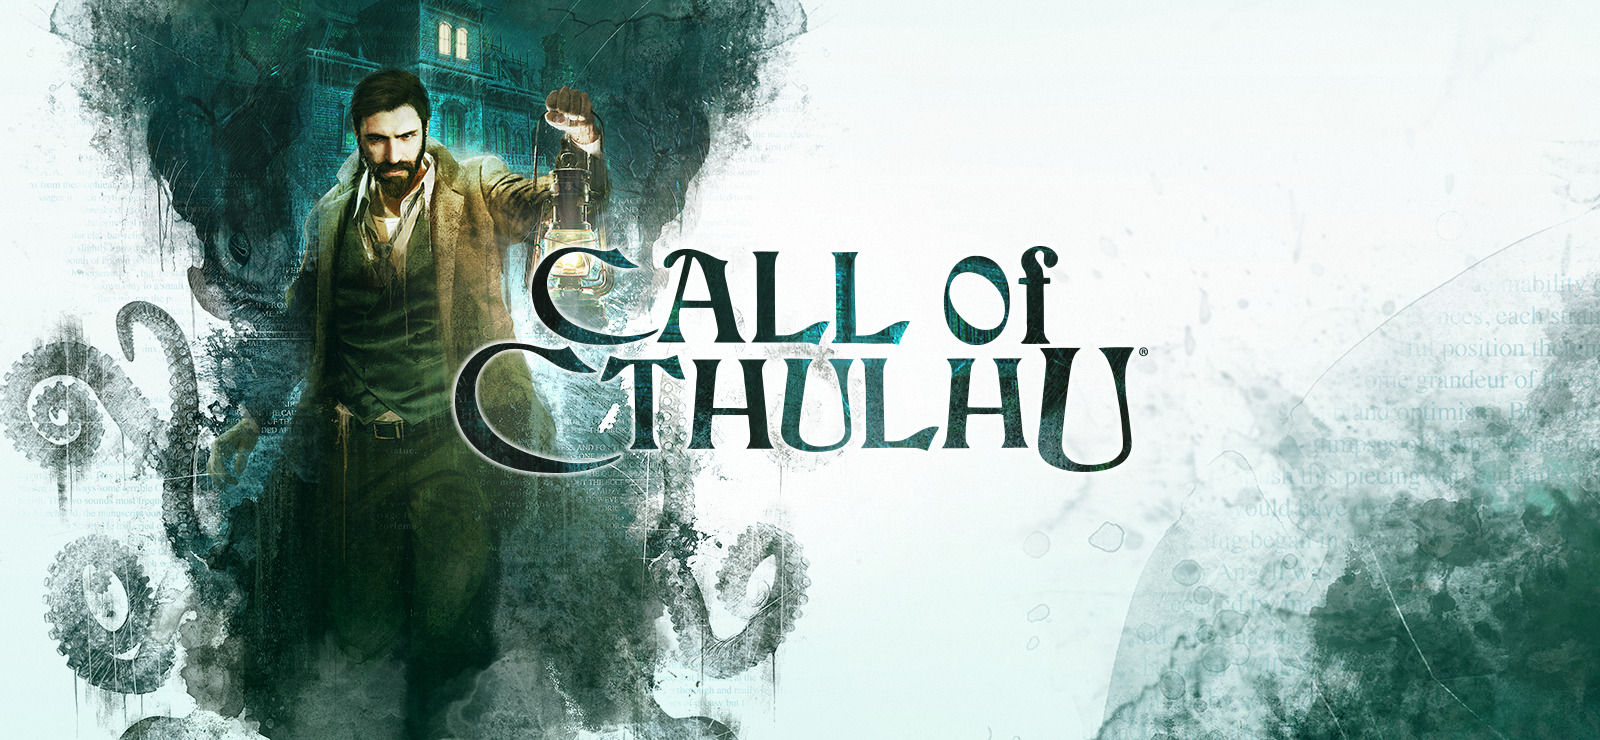 Cthulhu's crazy deals: Magrunner is free on GOG